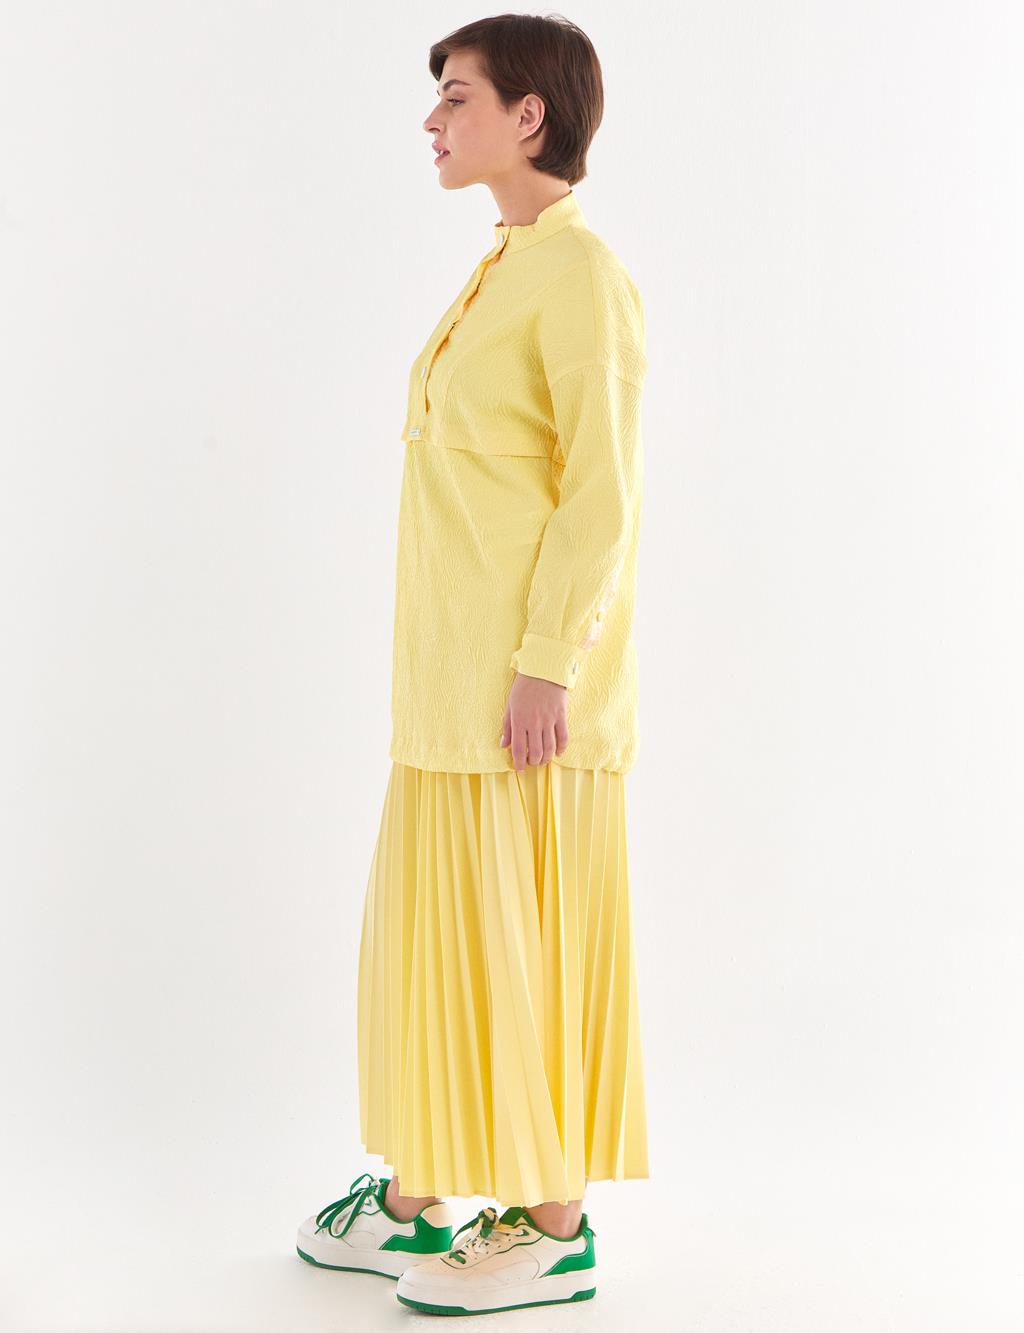 Relief Pattern Stand Collar Sweat Yellow